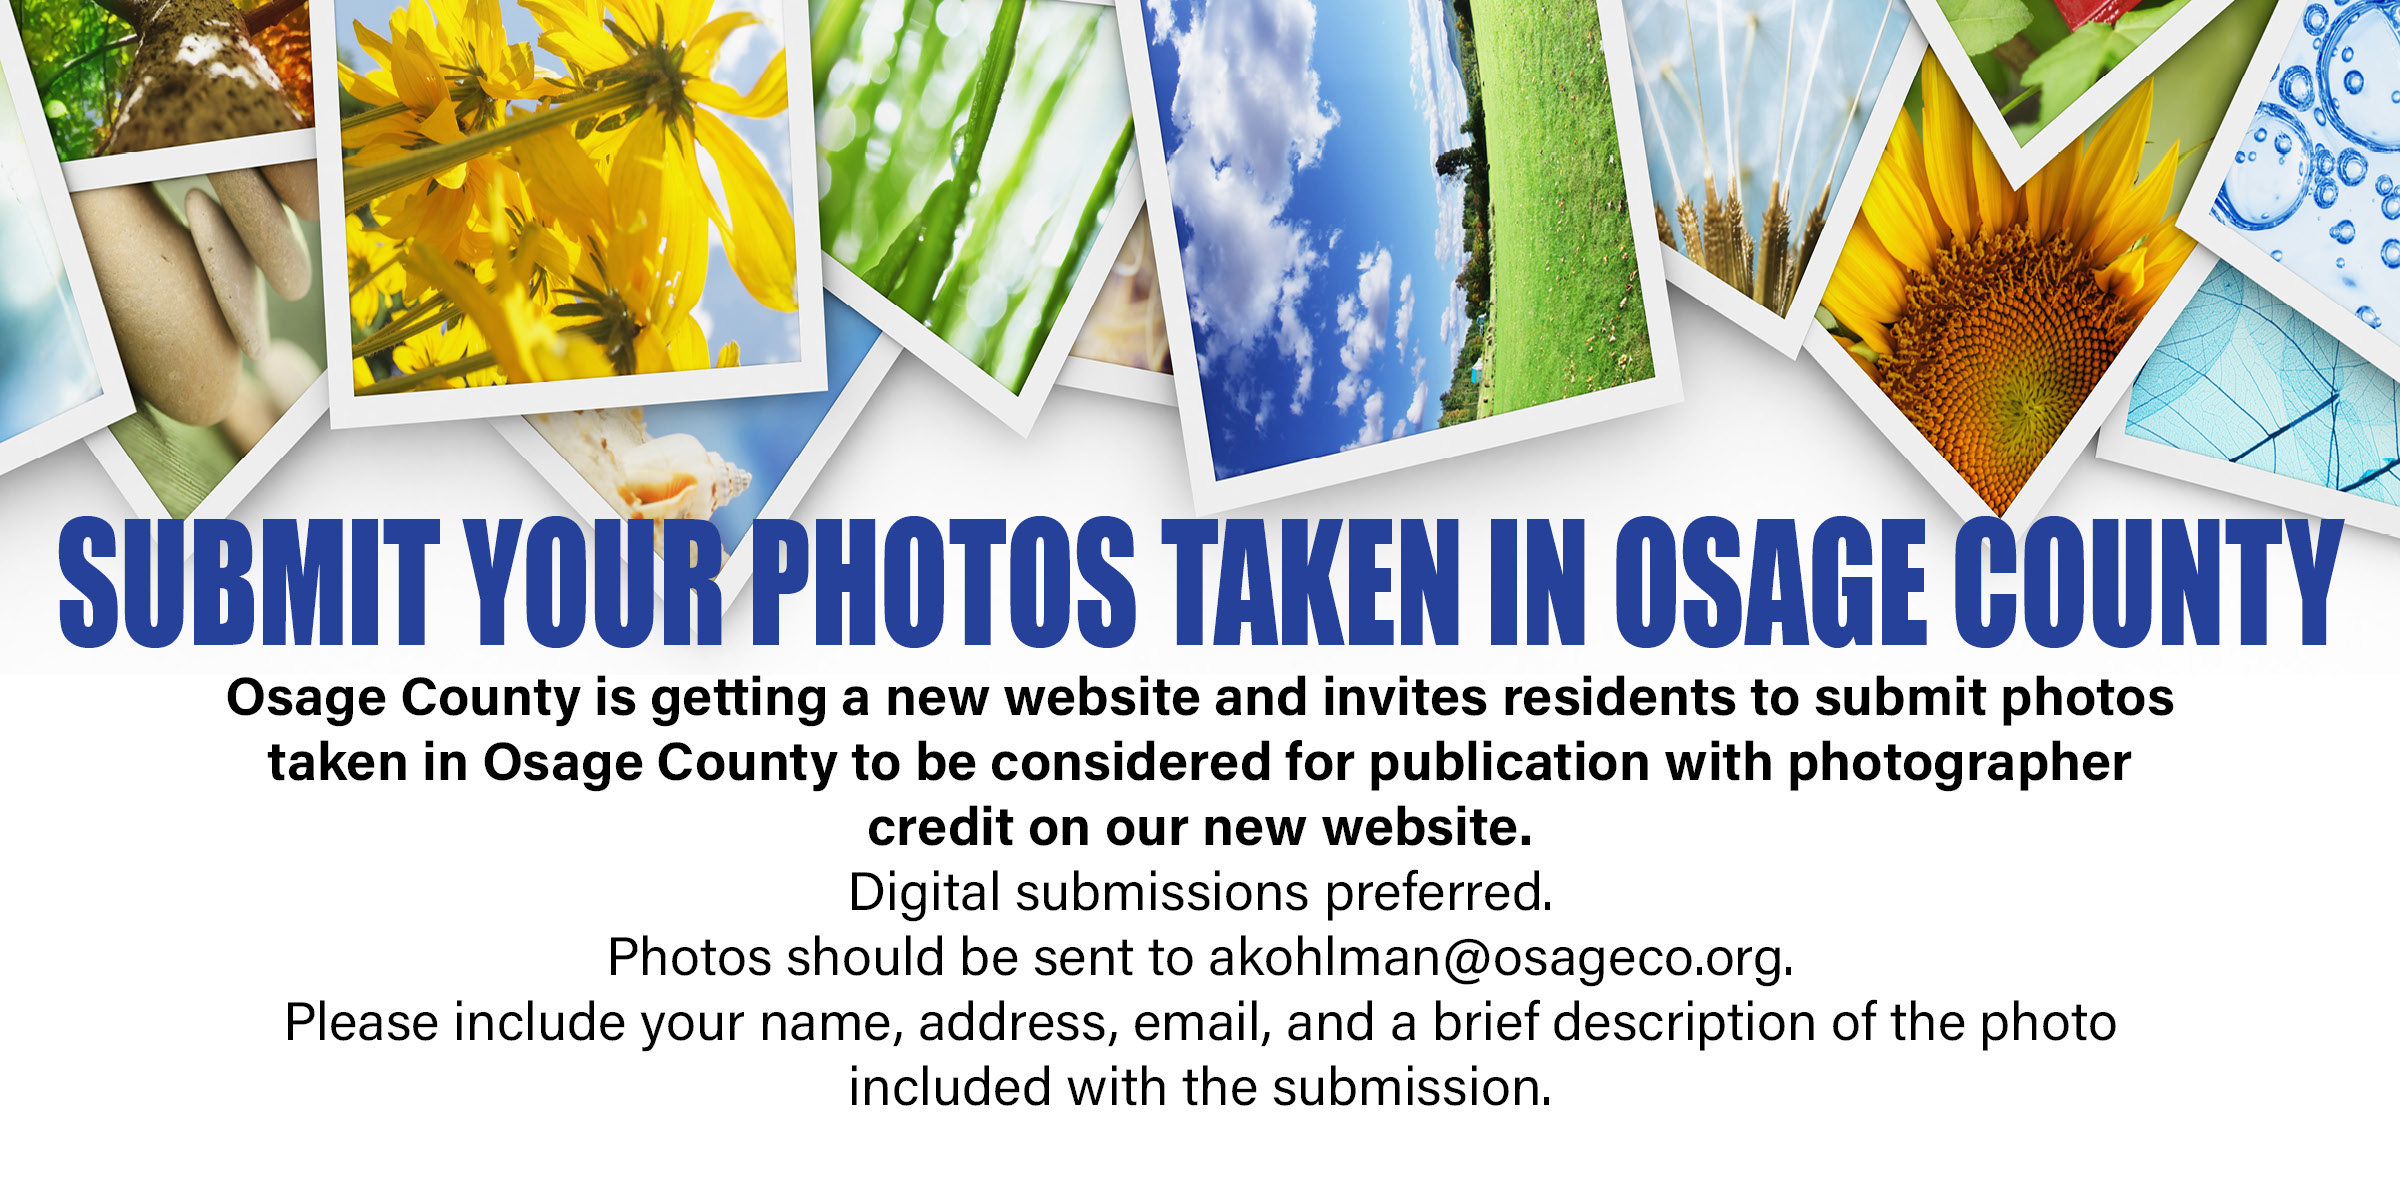 SUBMIT YOUR PHOTOS